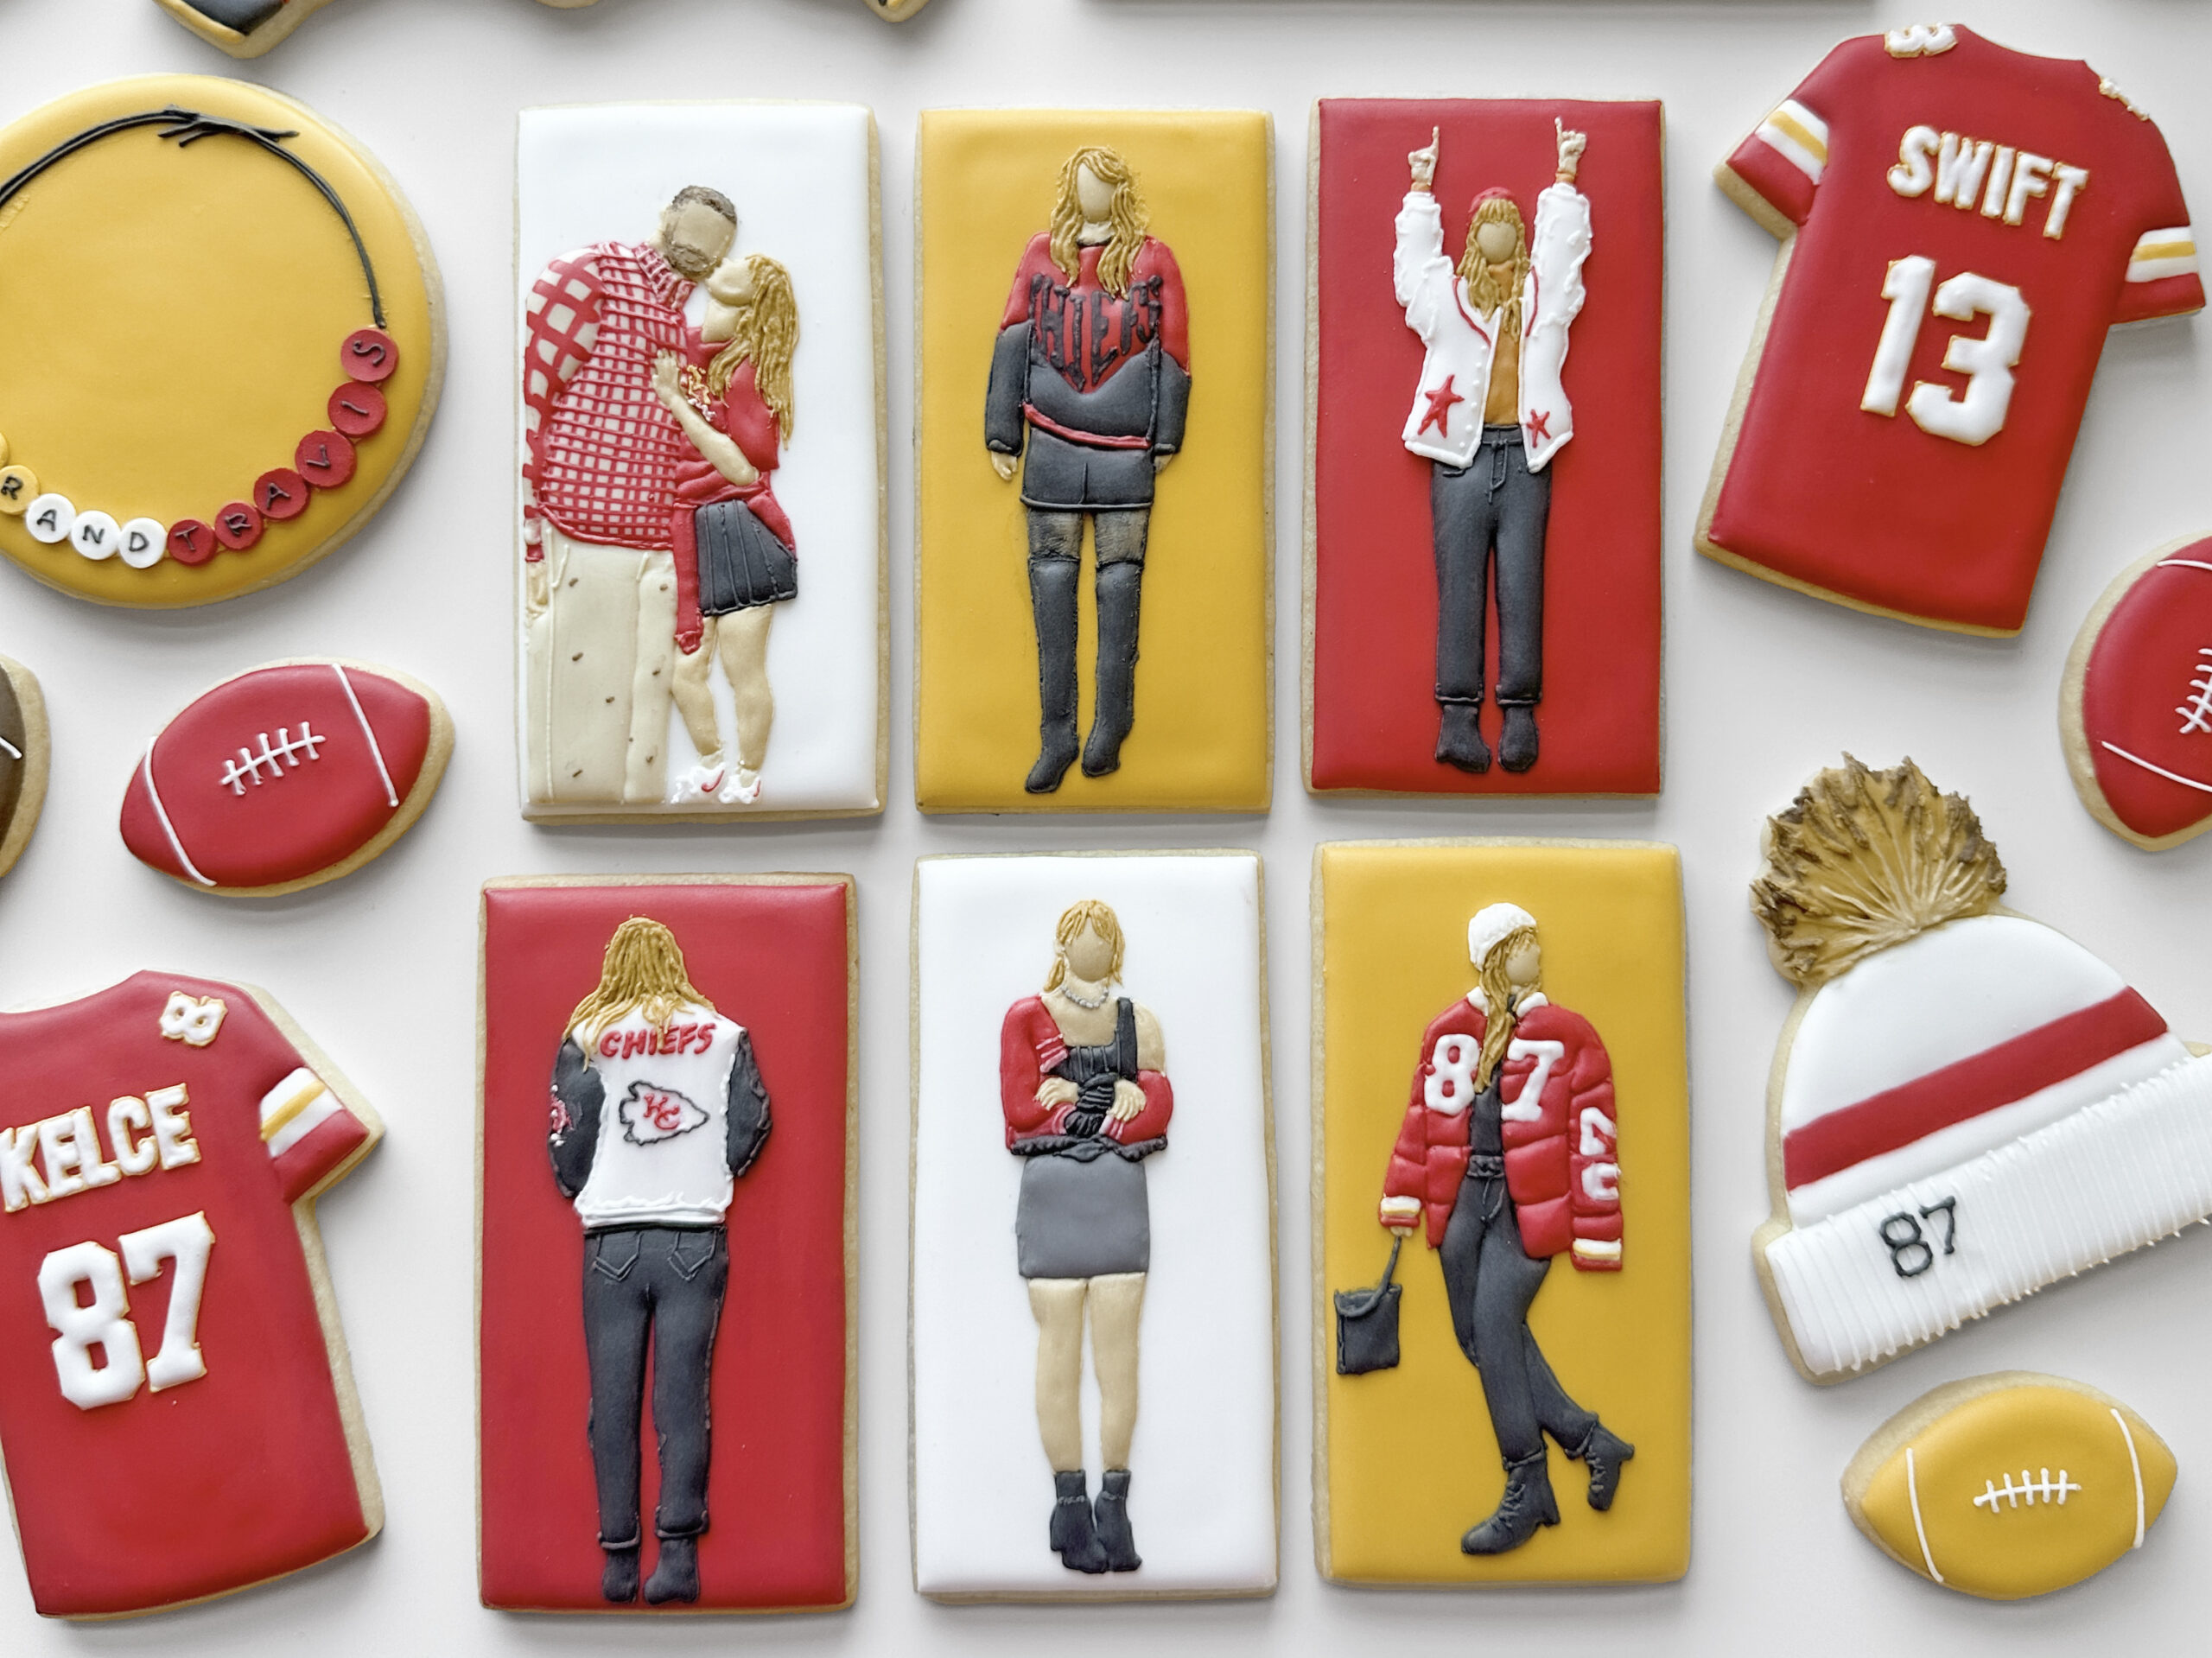 Taylor Swift fans mean business with Tortured Poets soap, Eras yarn, Kelce cookies